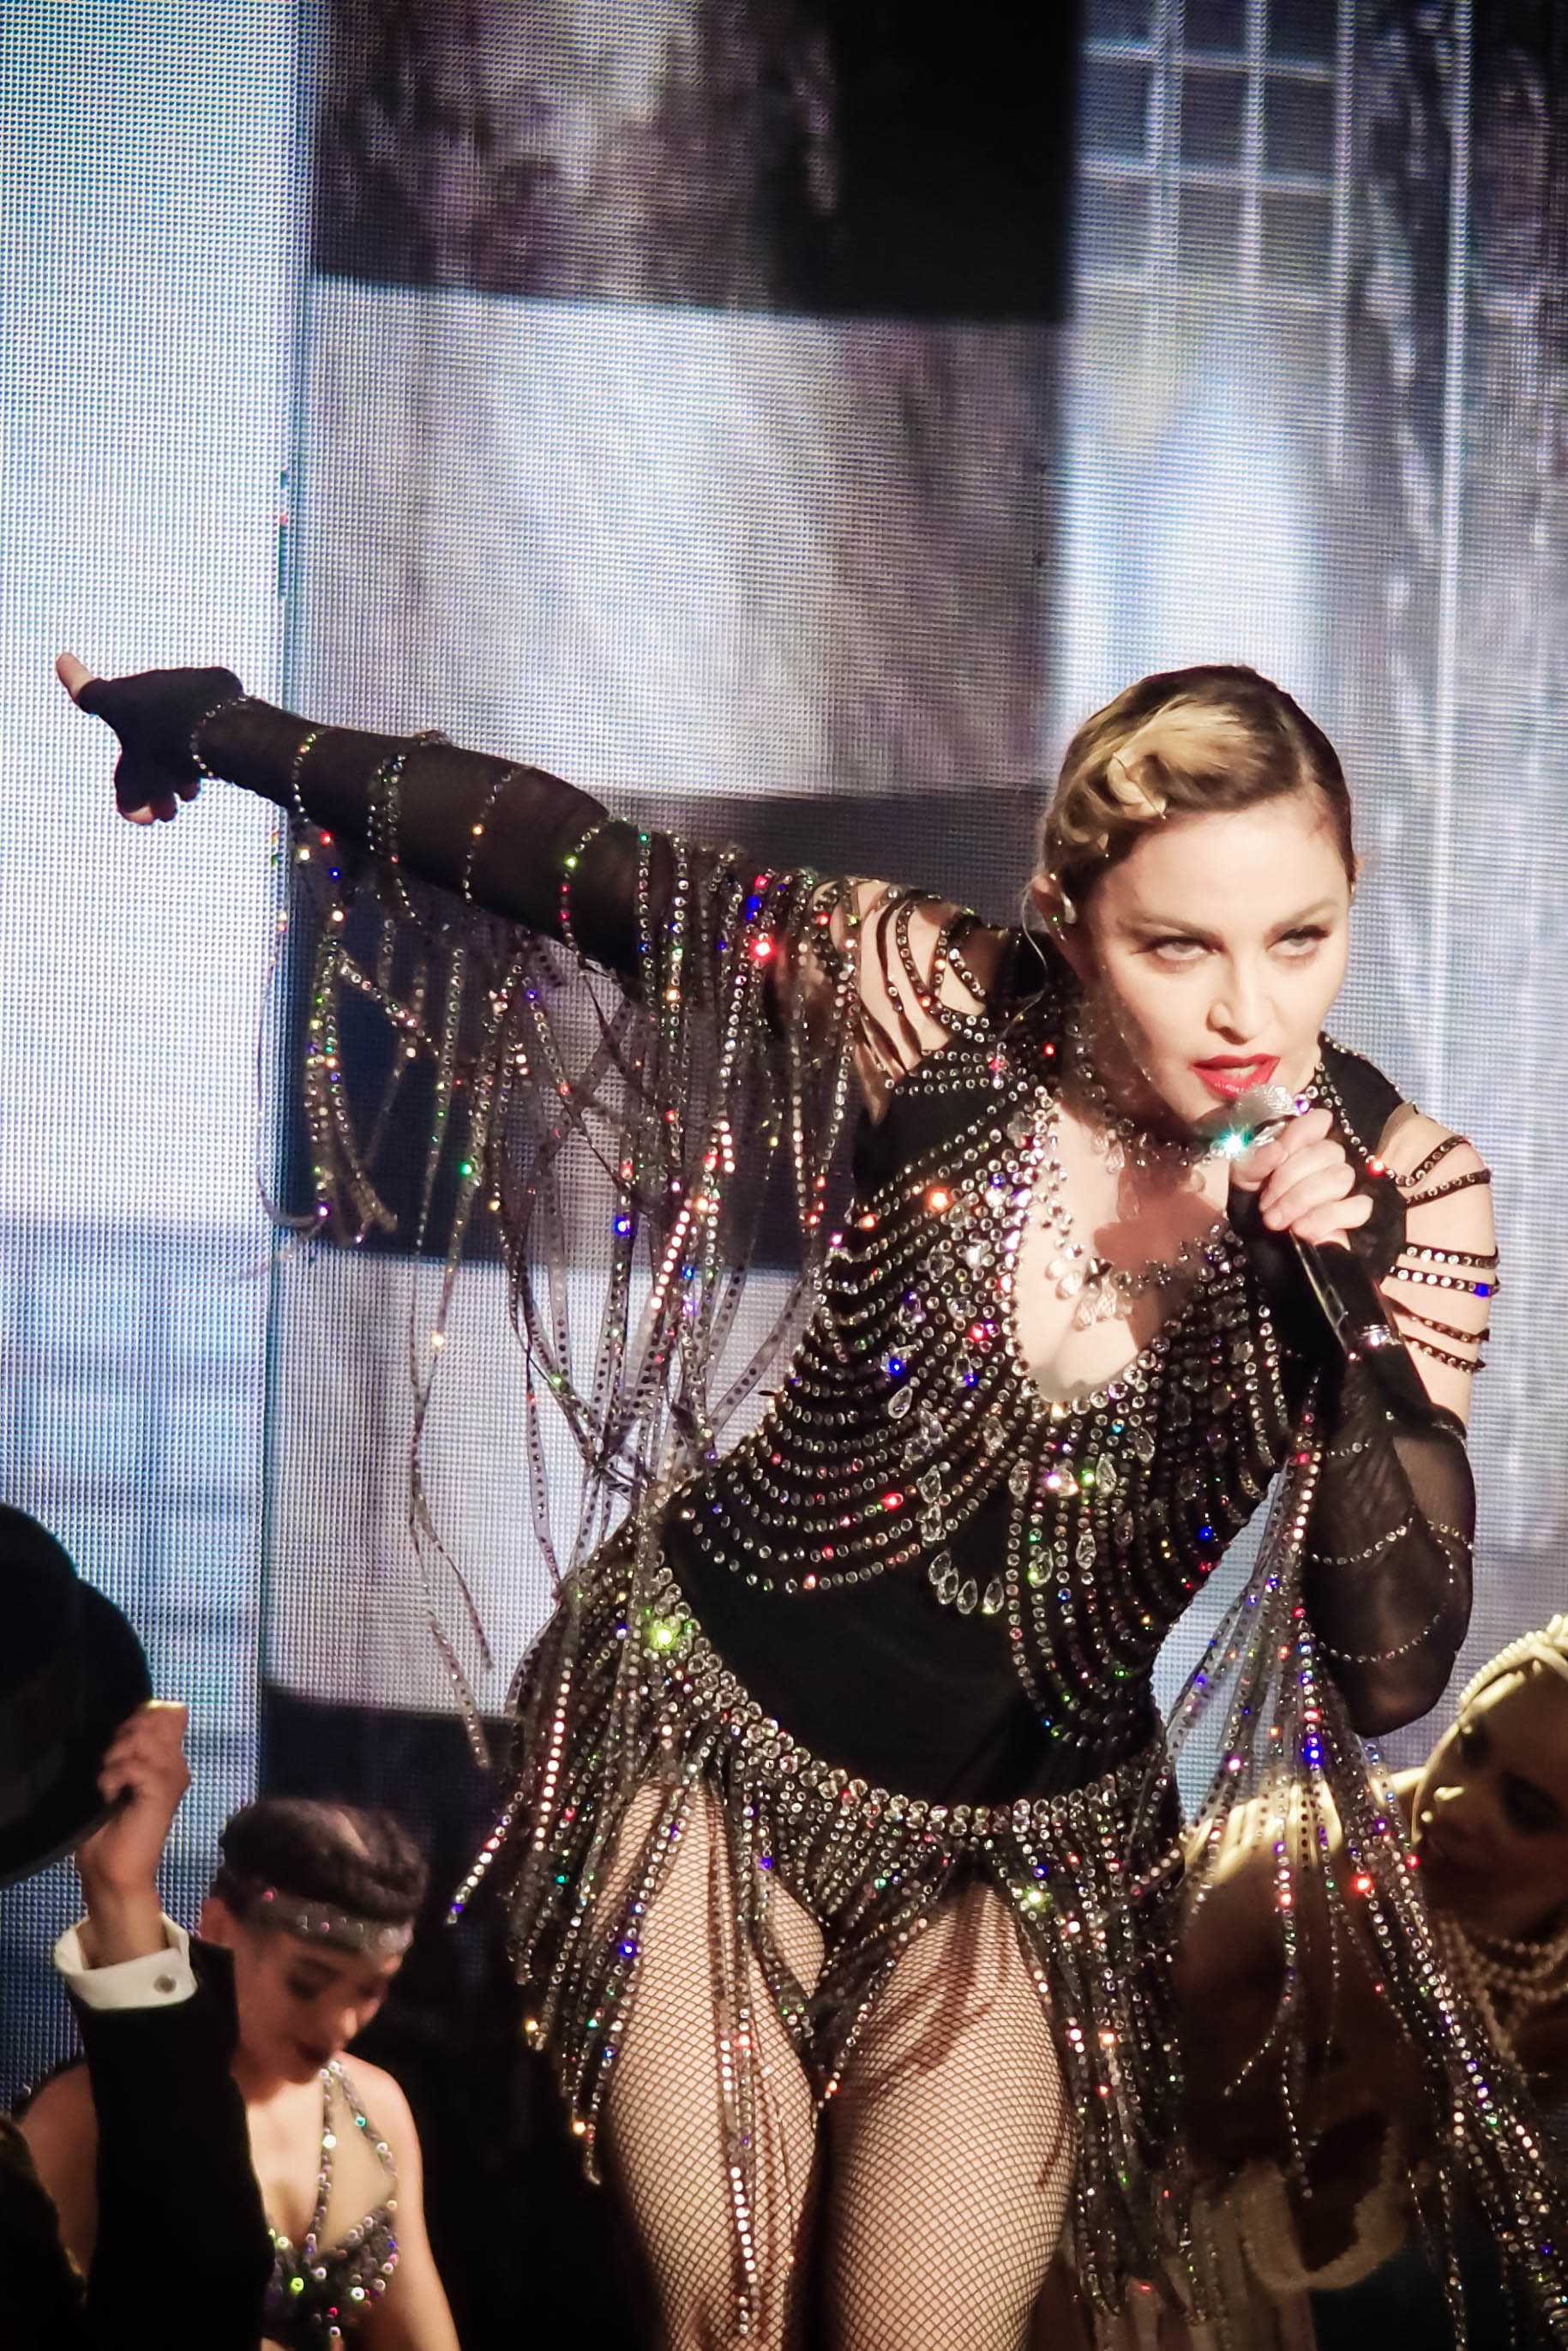 Madonna performing onstage in a bedazzled bodysuit